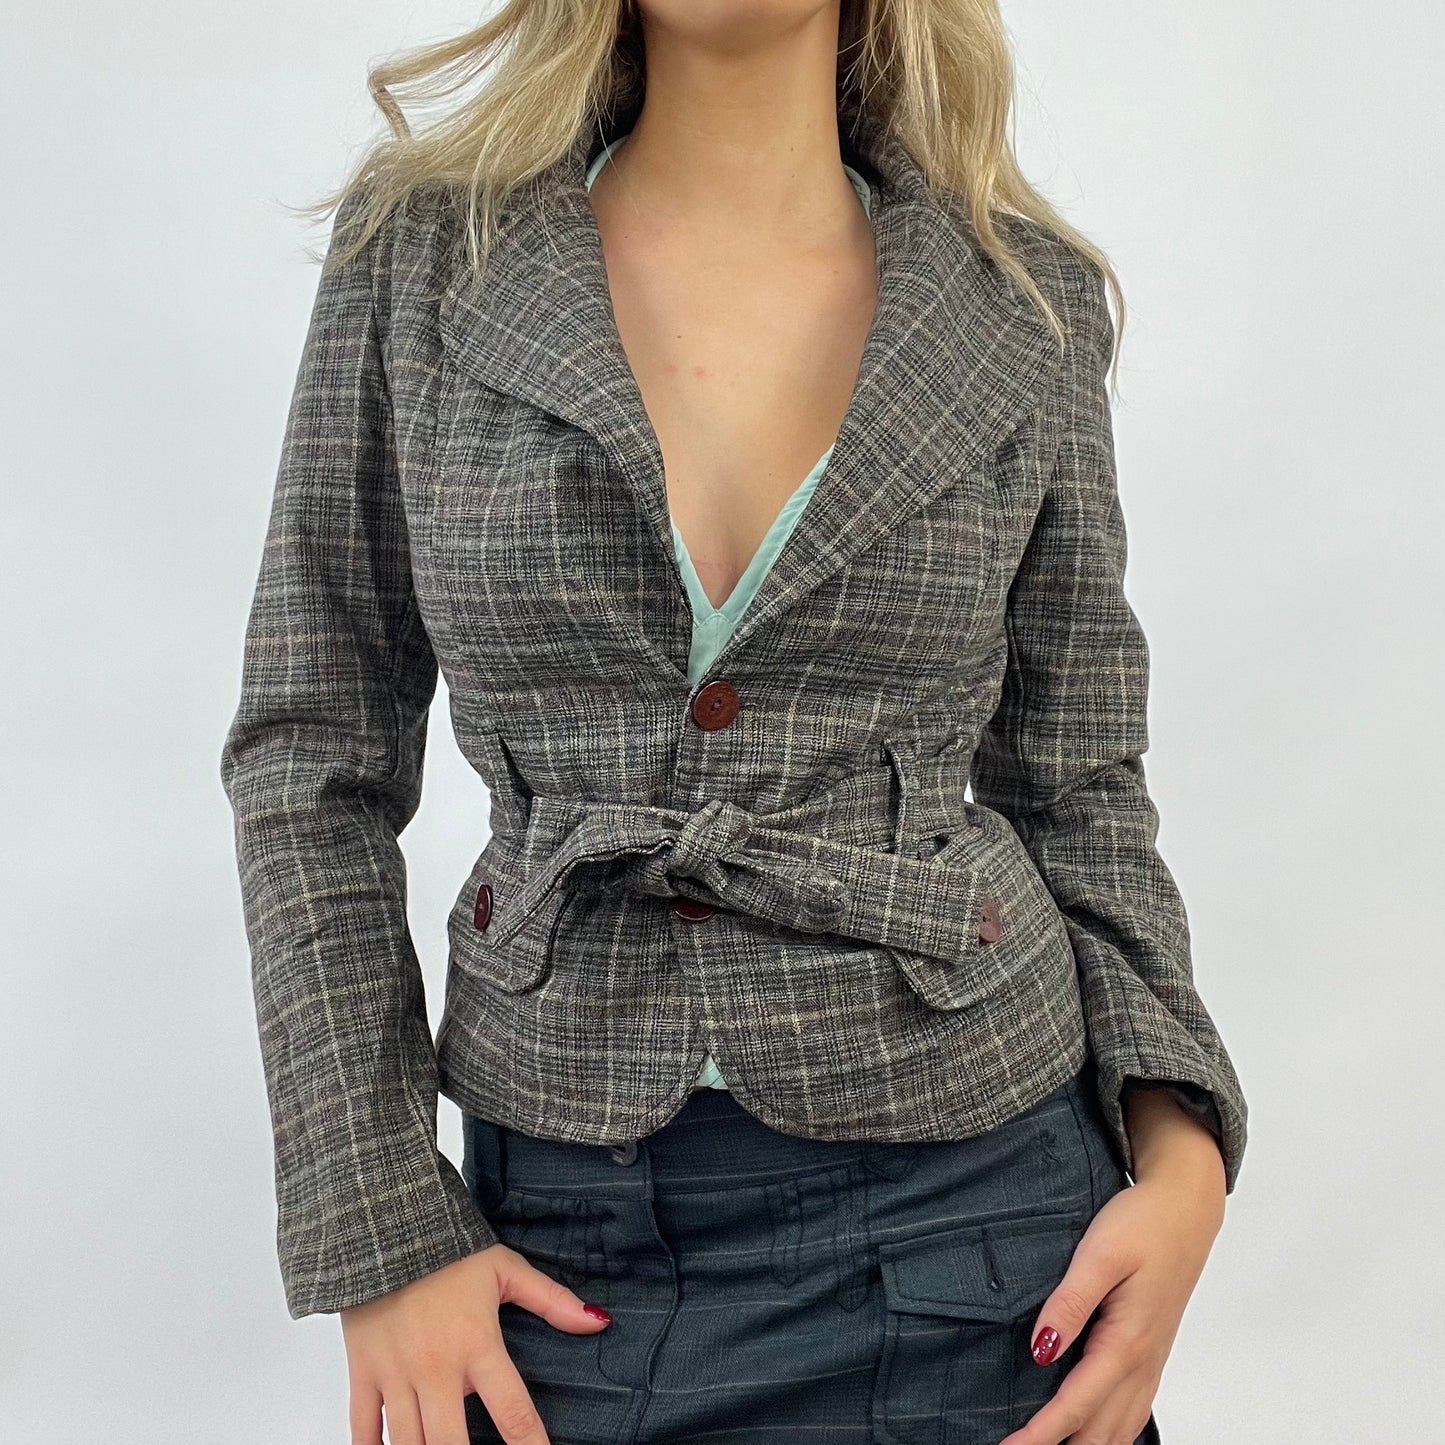 CORPCORE DROP | small brown checkered plaid blazer with bow